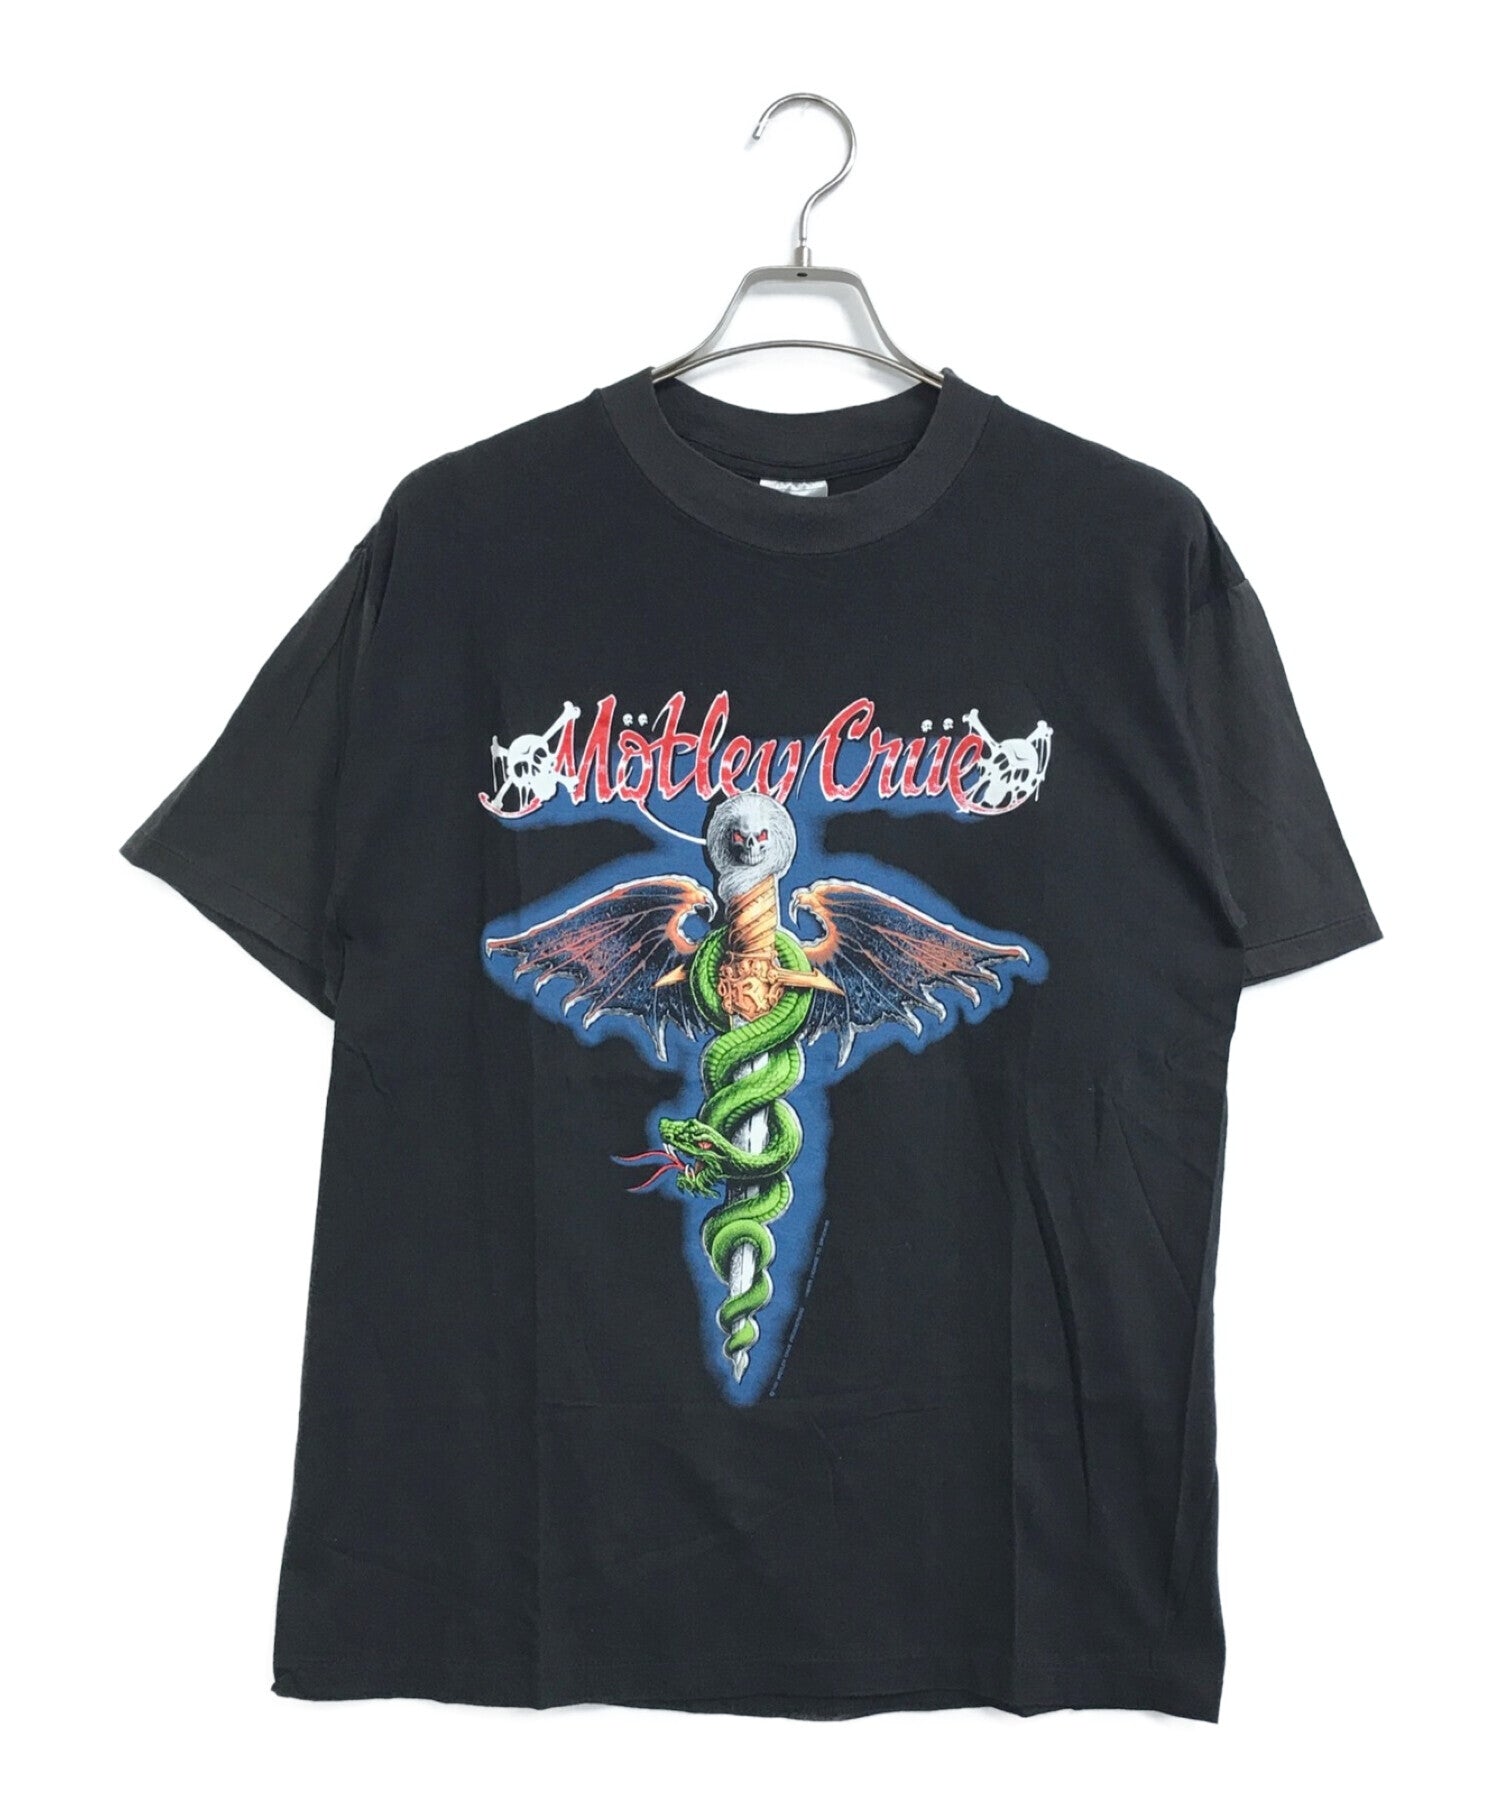 Accord Godkendelse lindring motley crue 80s Band T-shirts | Archive Factory